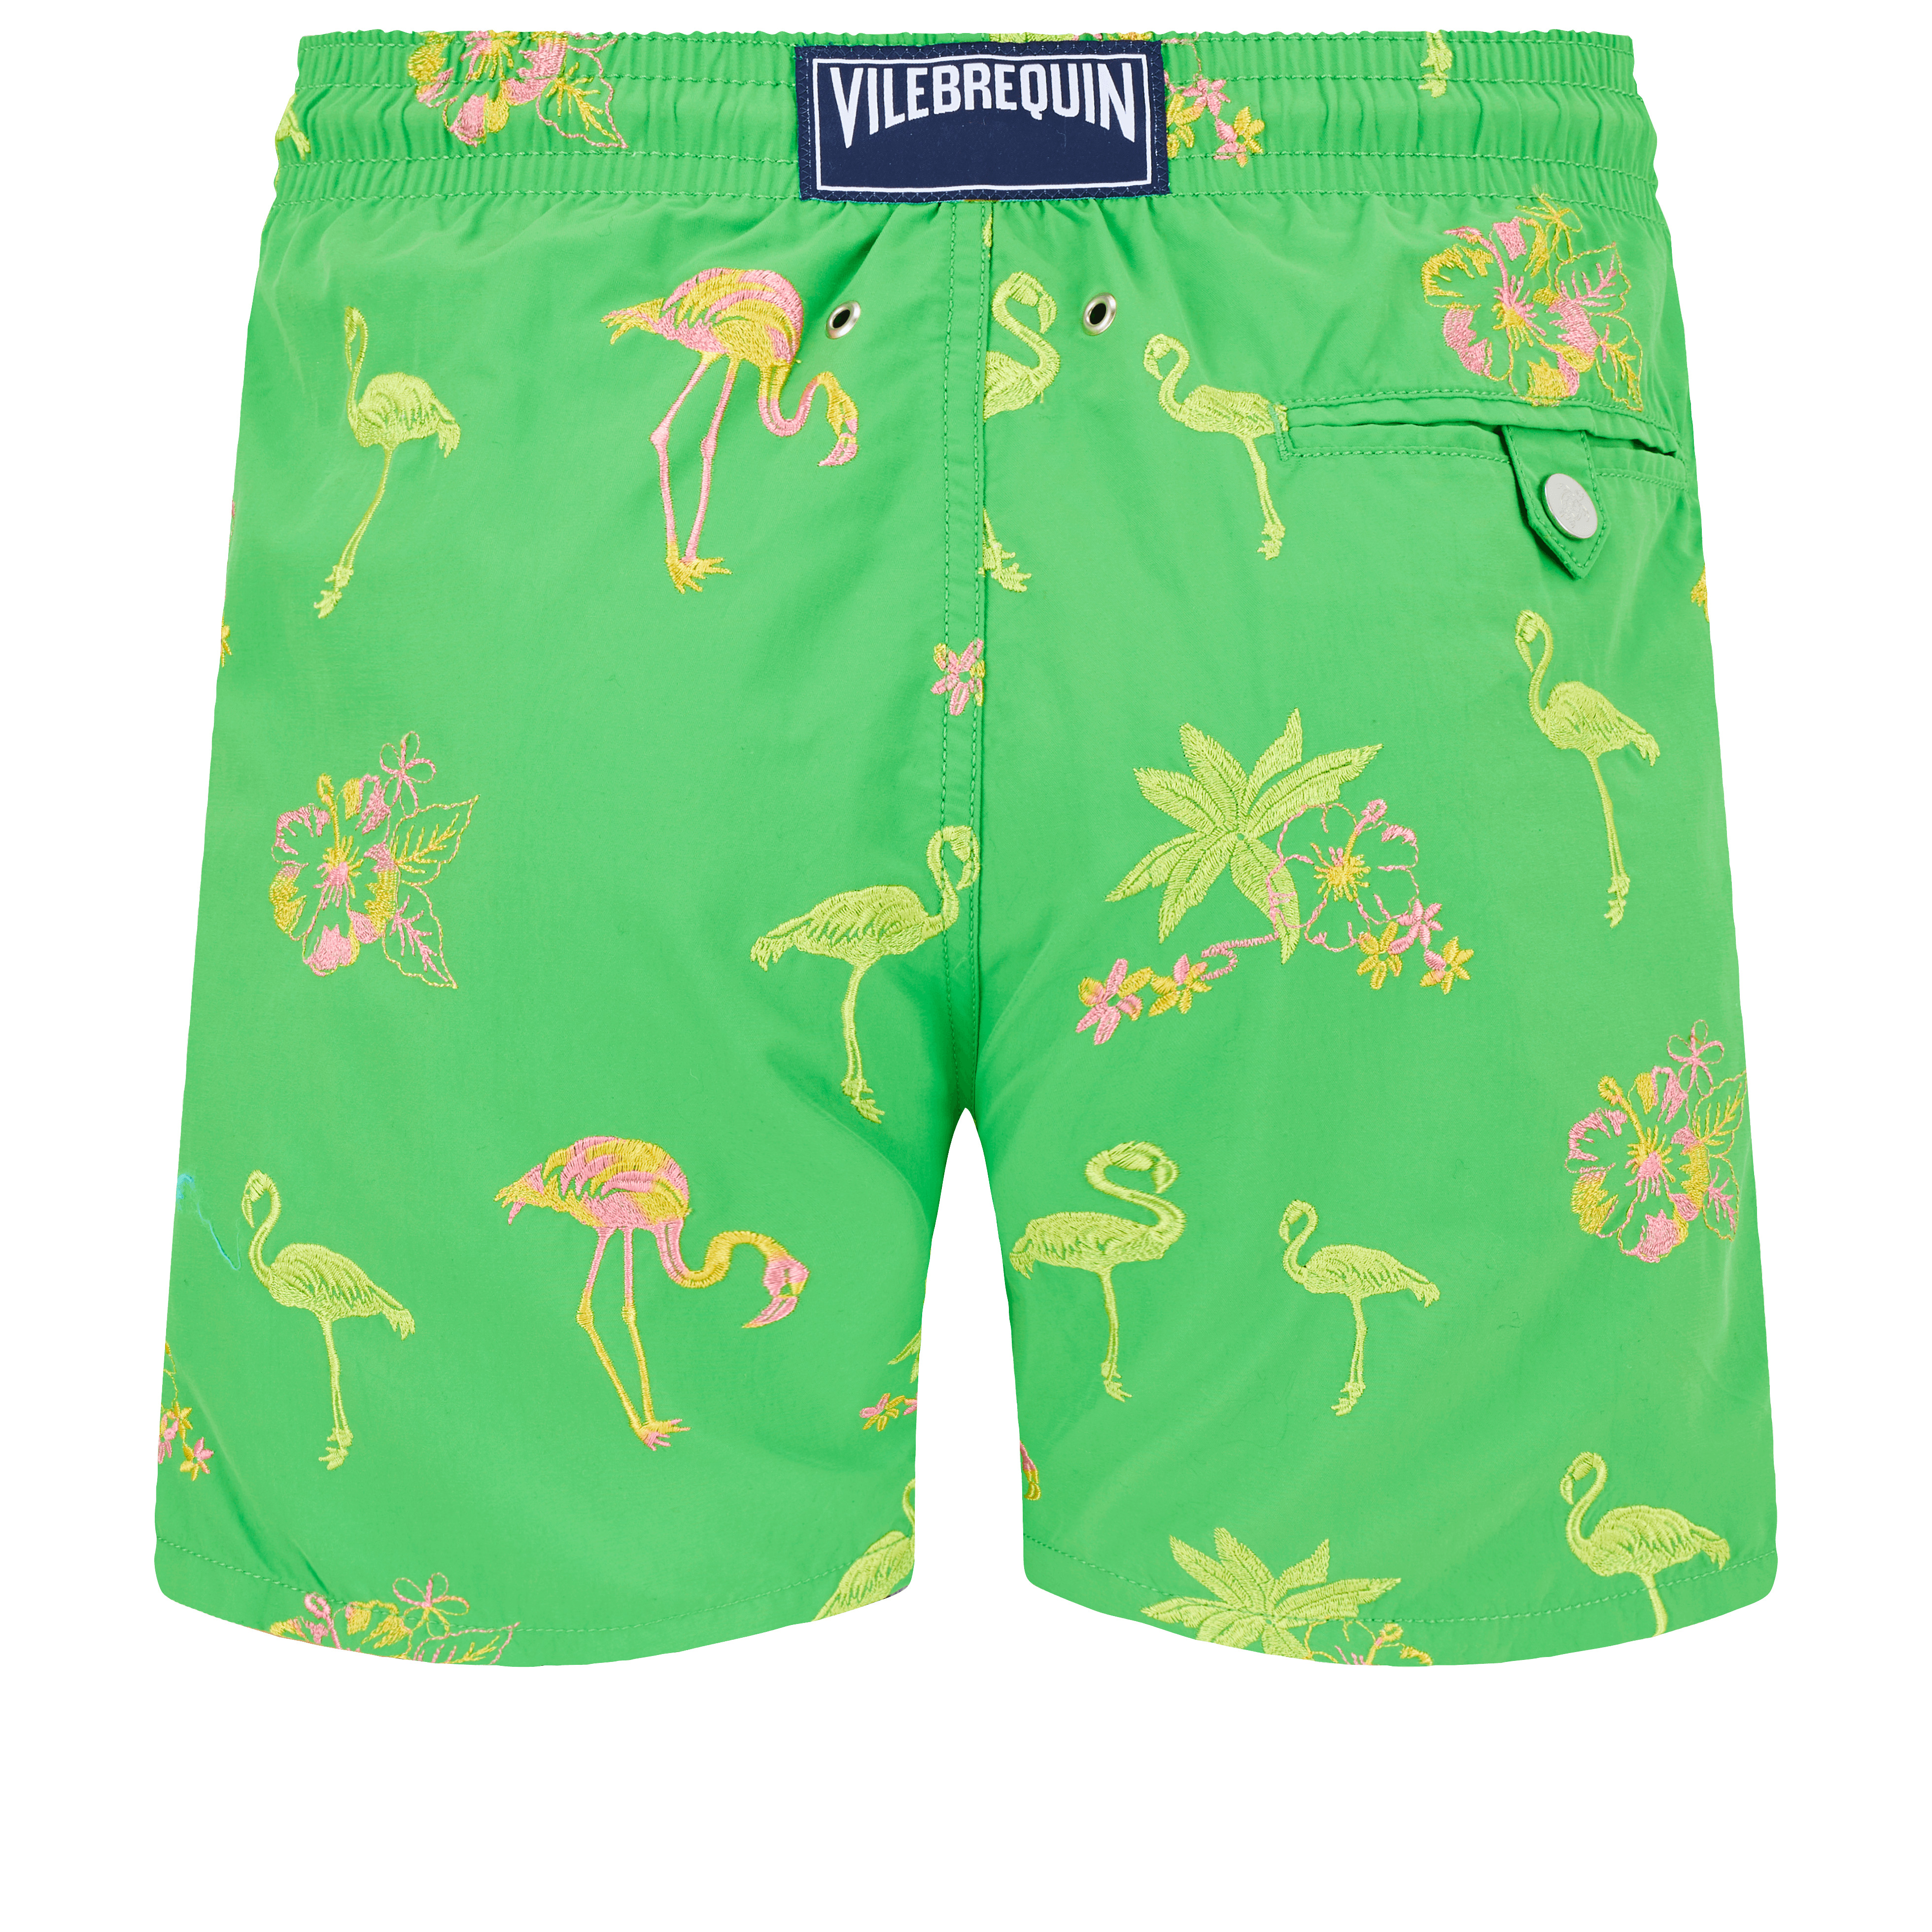 Men Swim Trunks Embroidered 2012 Flamants Rose - Limited Edition - 2